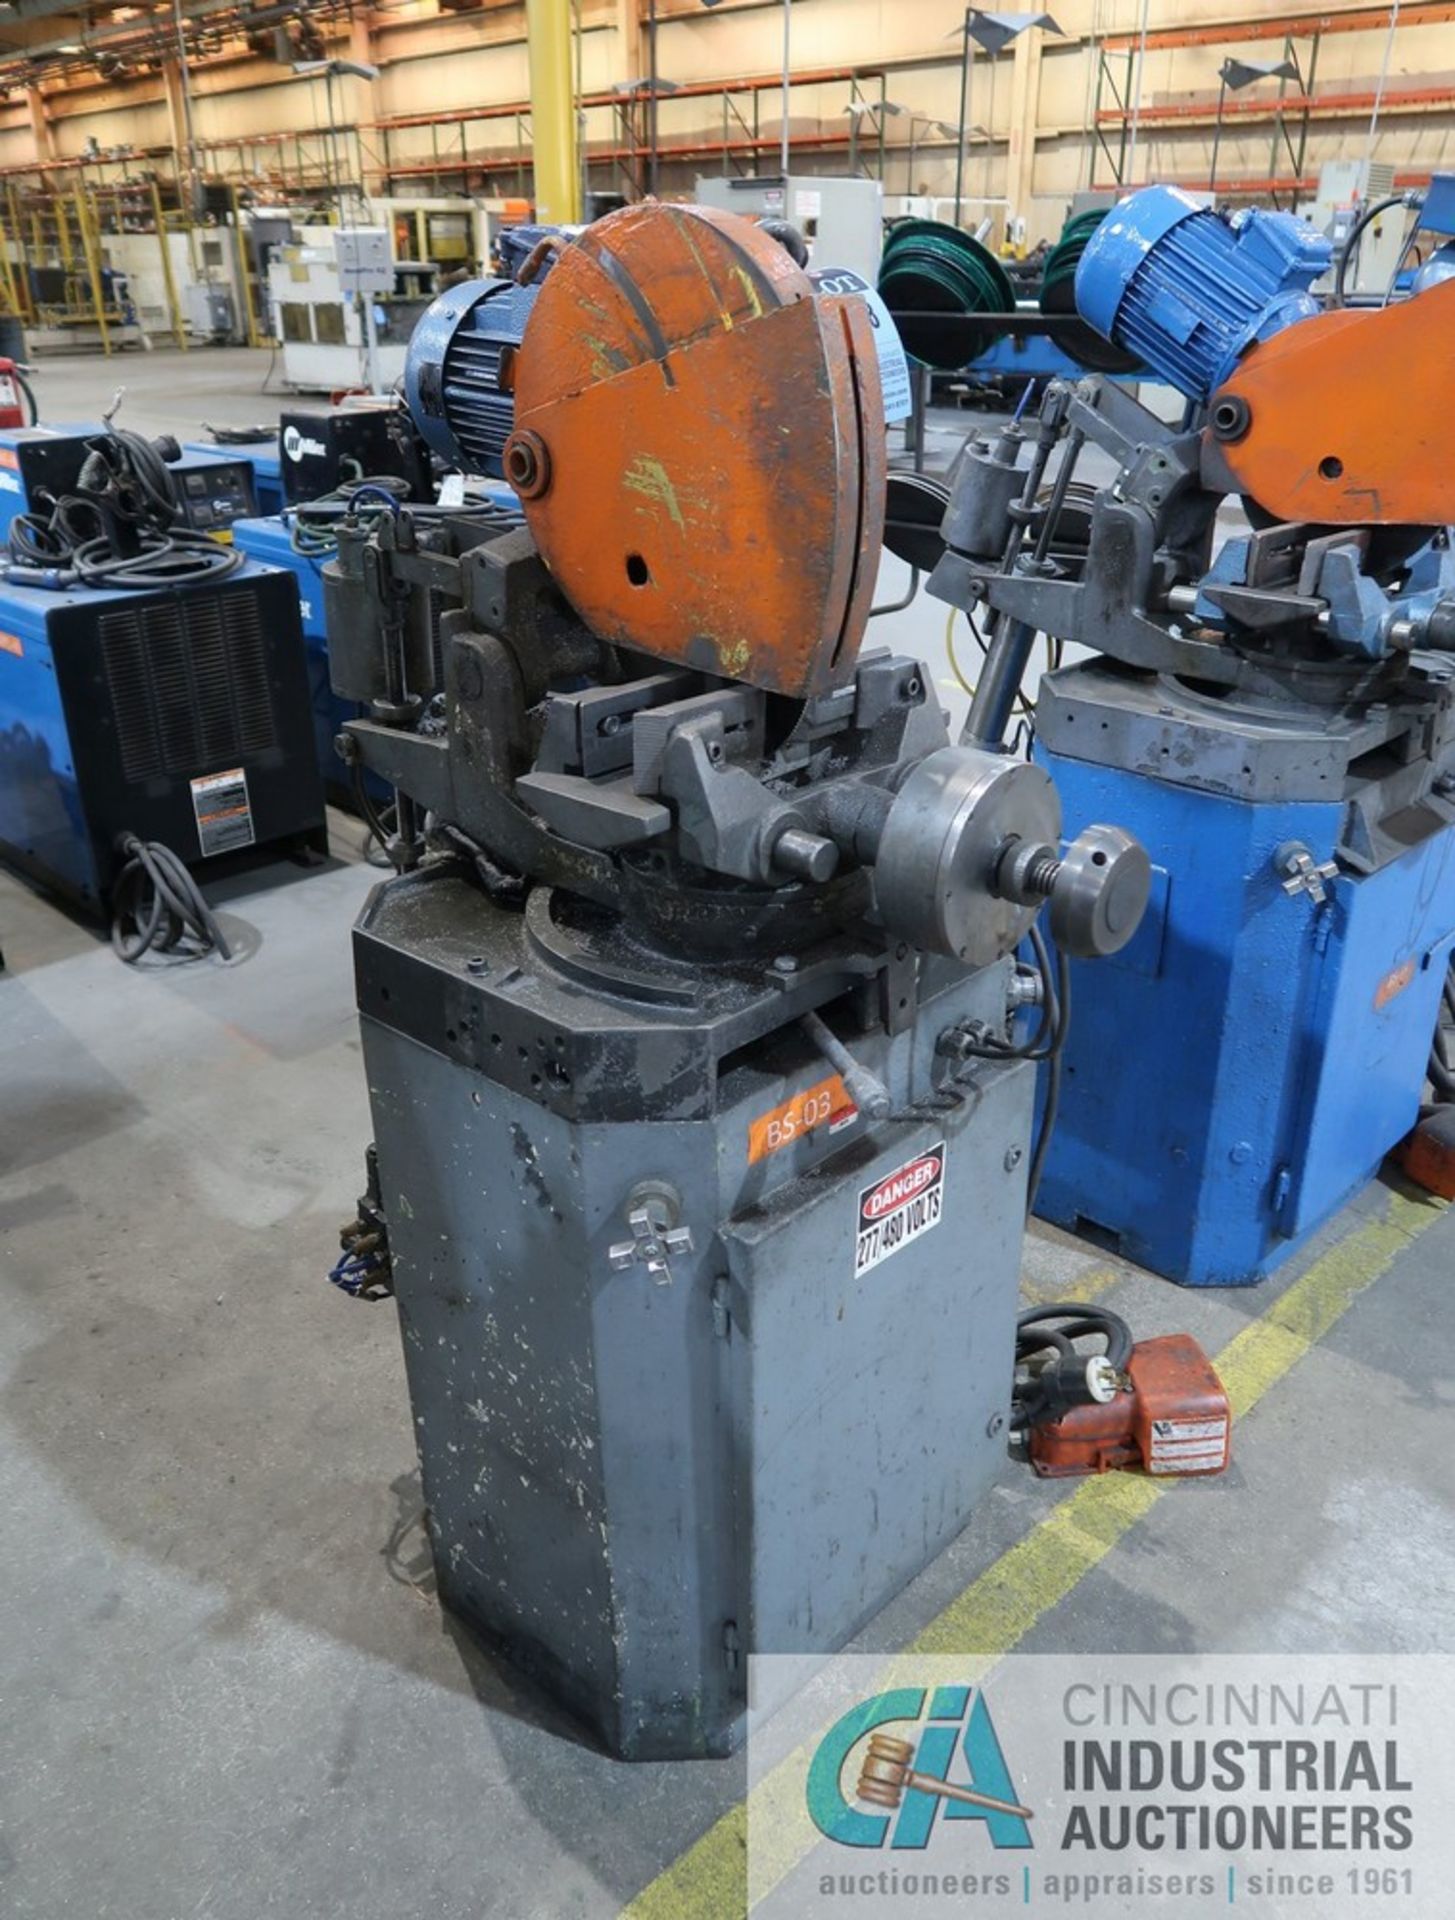 12" BEWO VARIABLE SPEED COLD SAW; S/N N/A, ASSET NO. 0635, 3-PHASE, FOOT PEDAL - Image 2 of 2